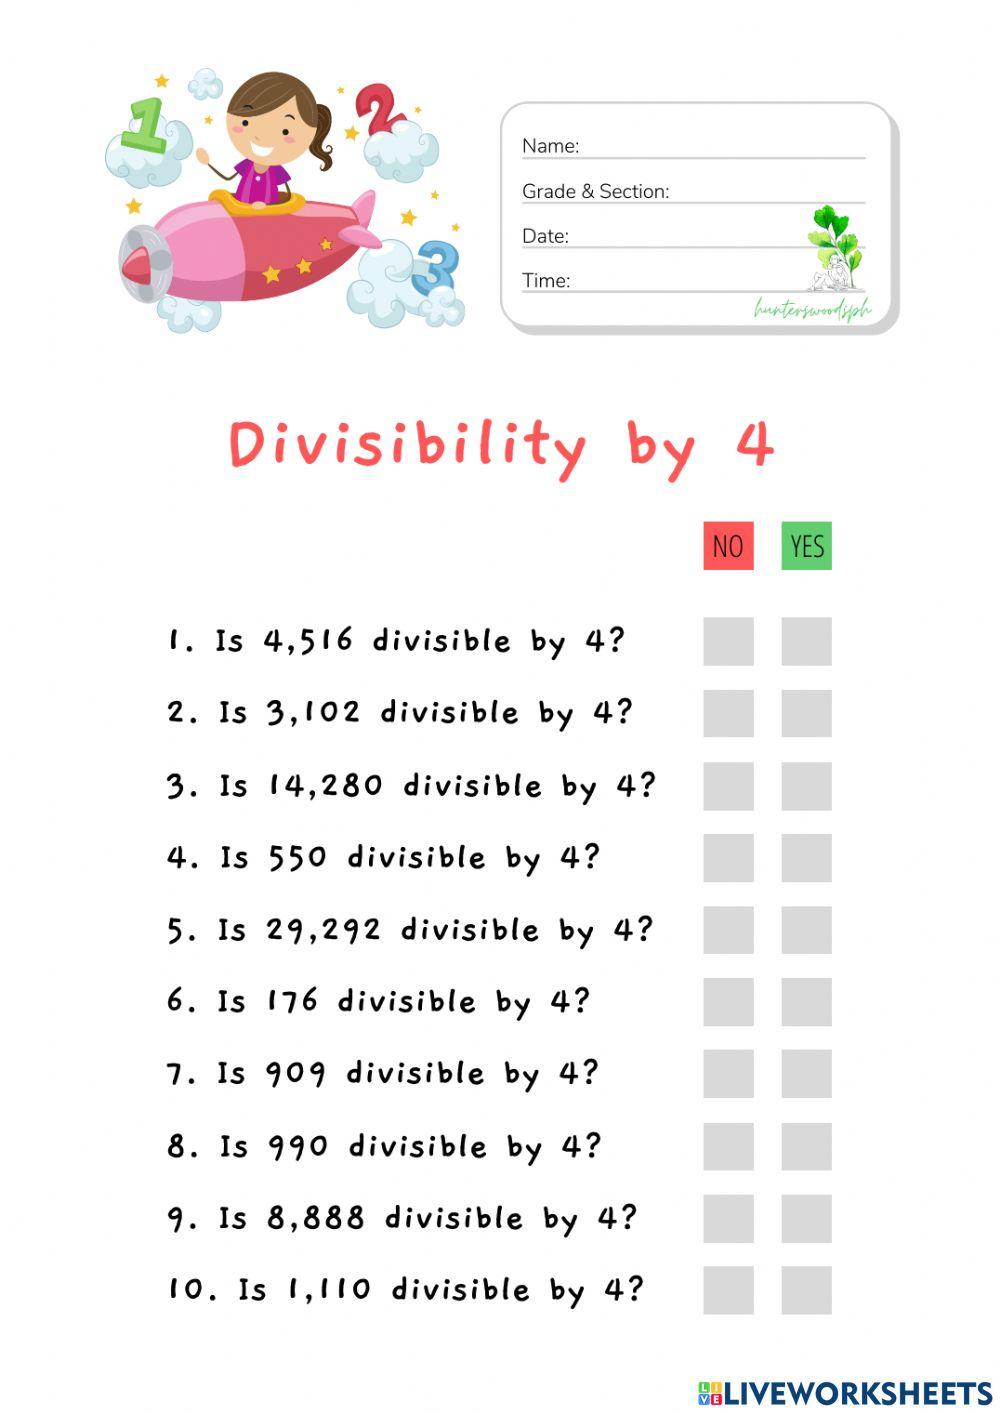 Divisibility by 4 (HuntersWoodsPH Math)